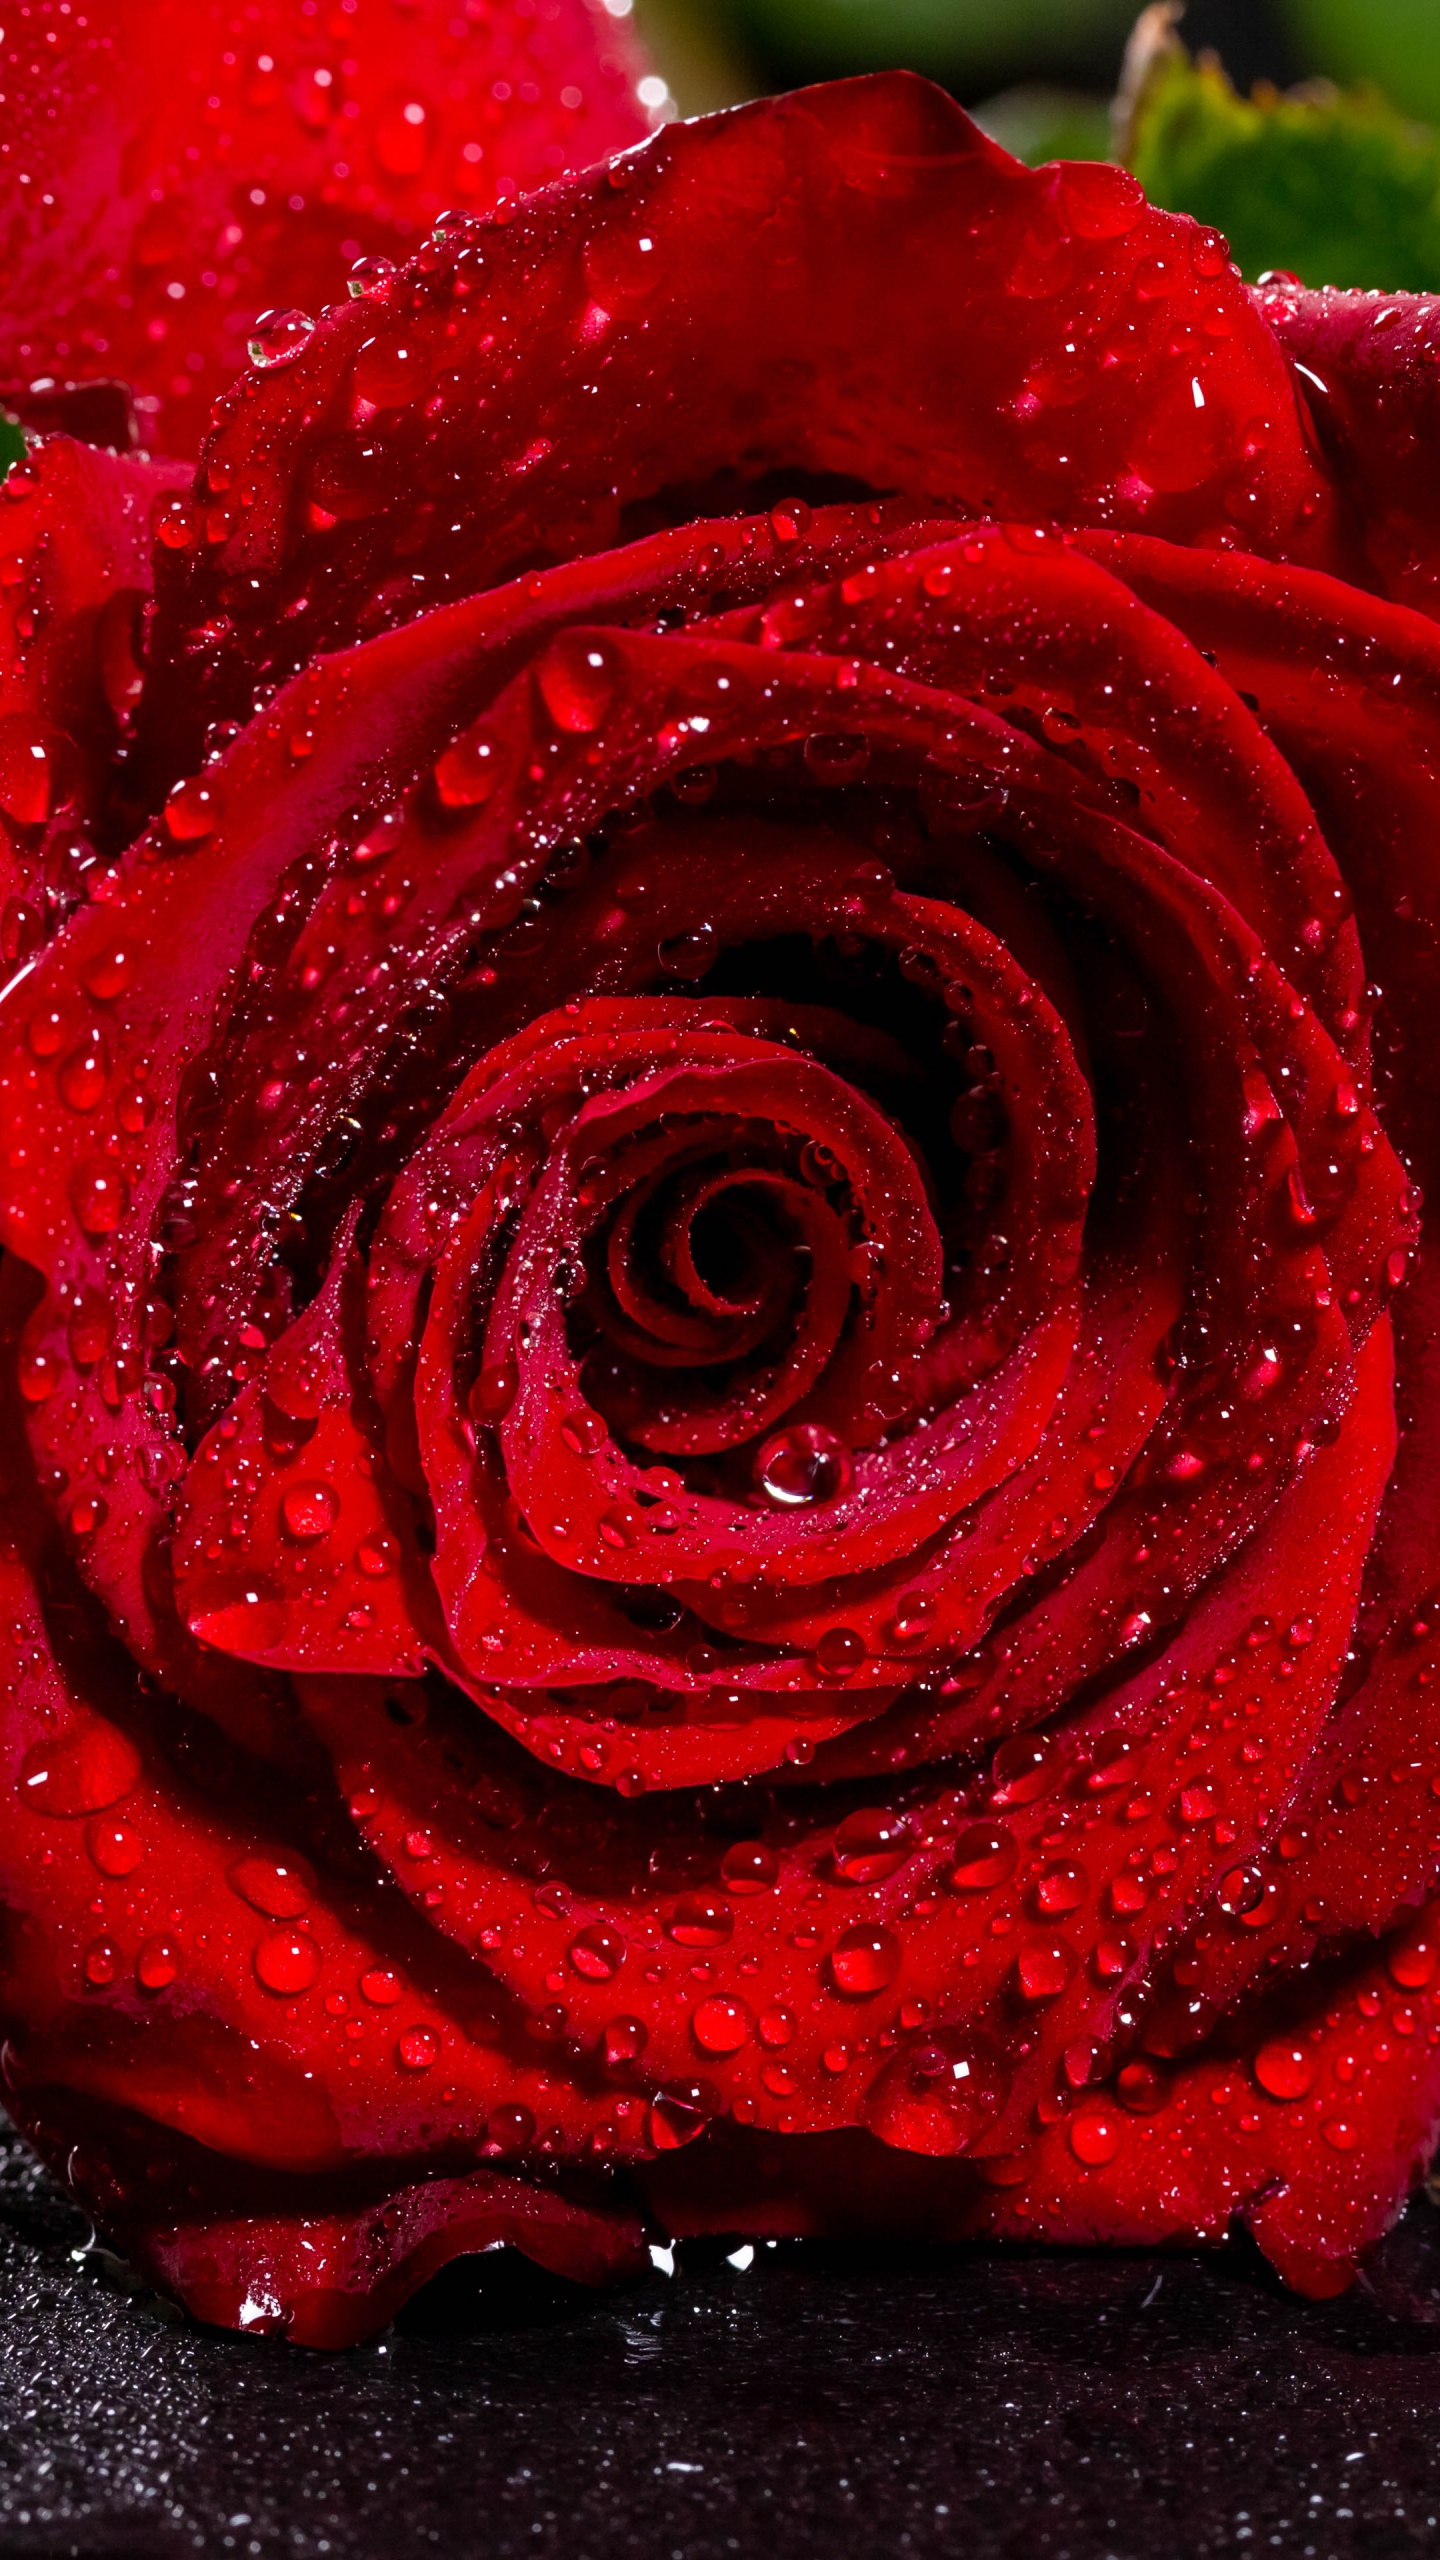 Red Rose on Black Surface. Wallpaper in 1440x2560 Resolution